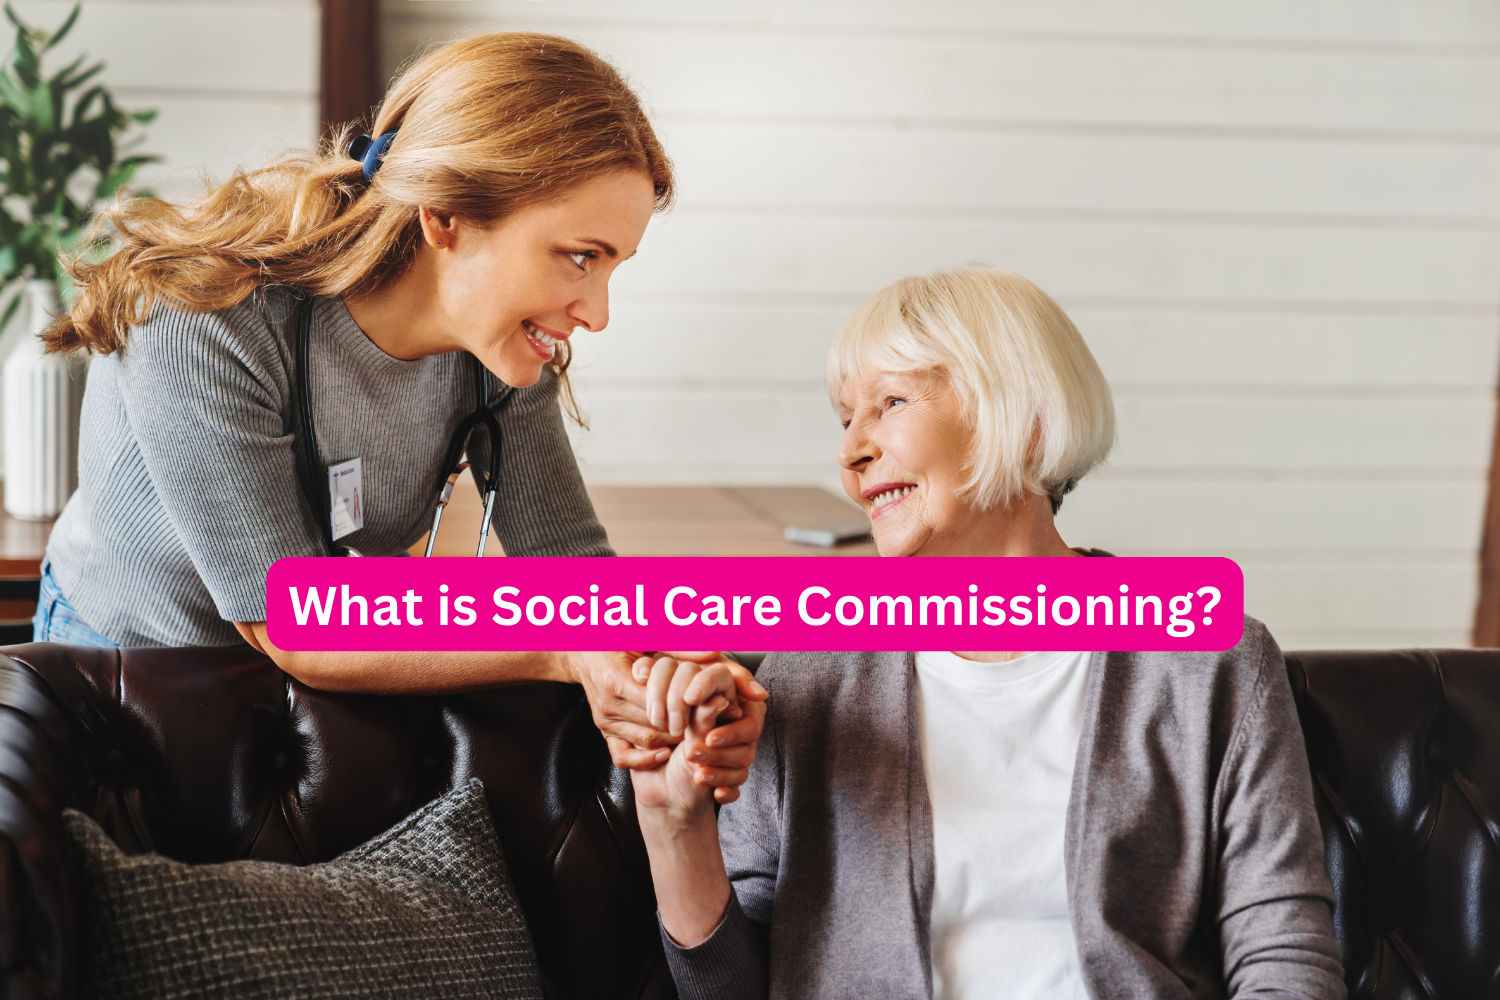 What is Social Care Commissioning?